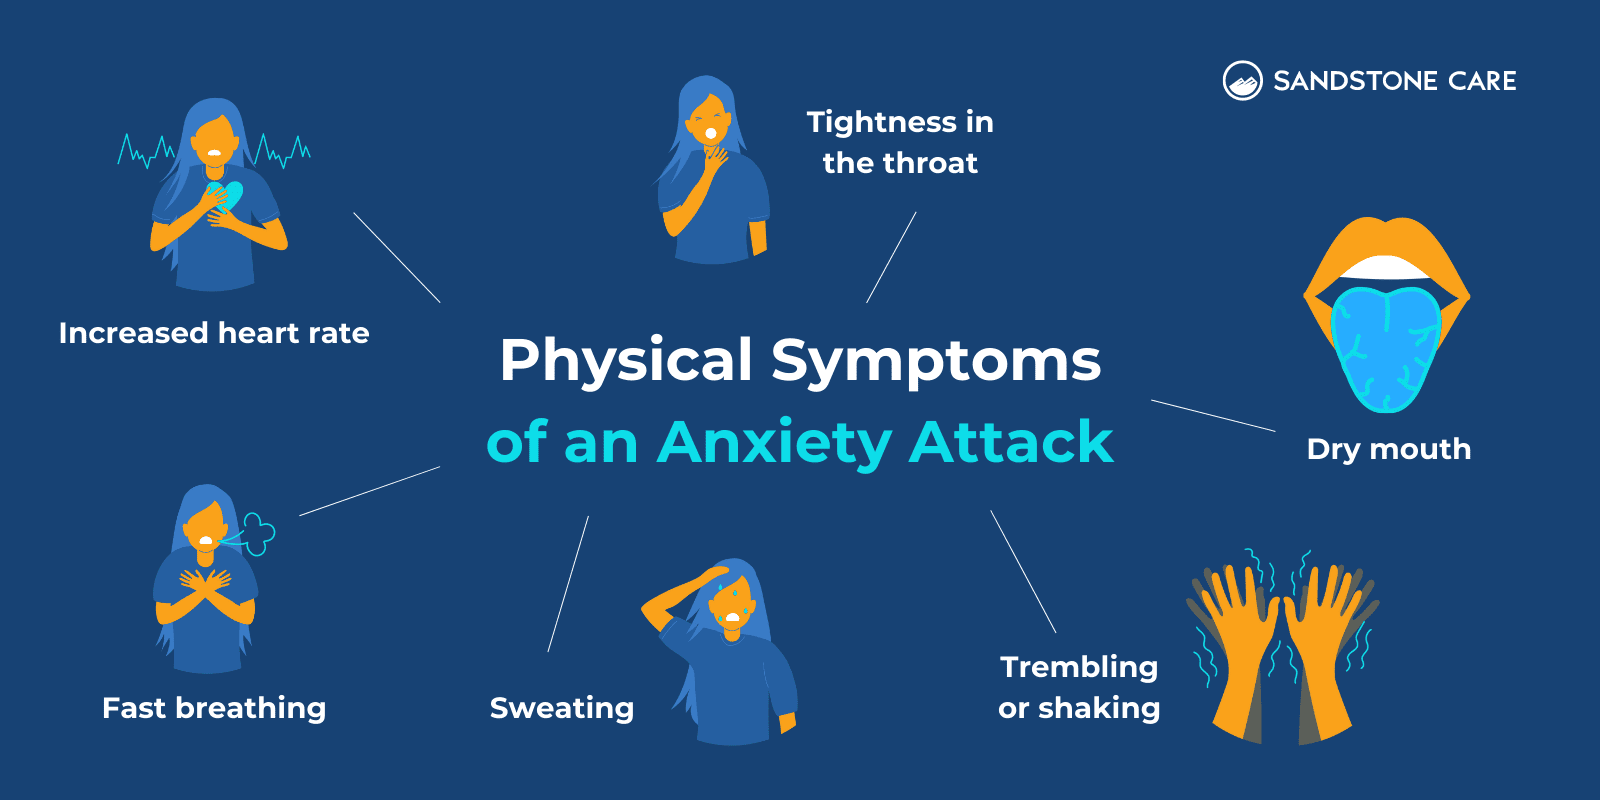 "Physical Symptoms Of An Anxiety Attack" text surrounded by different symptoms represented by relevant graphics